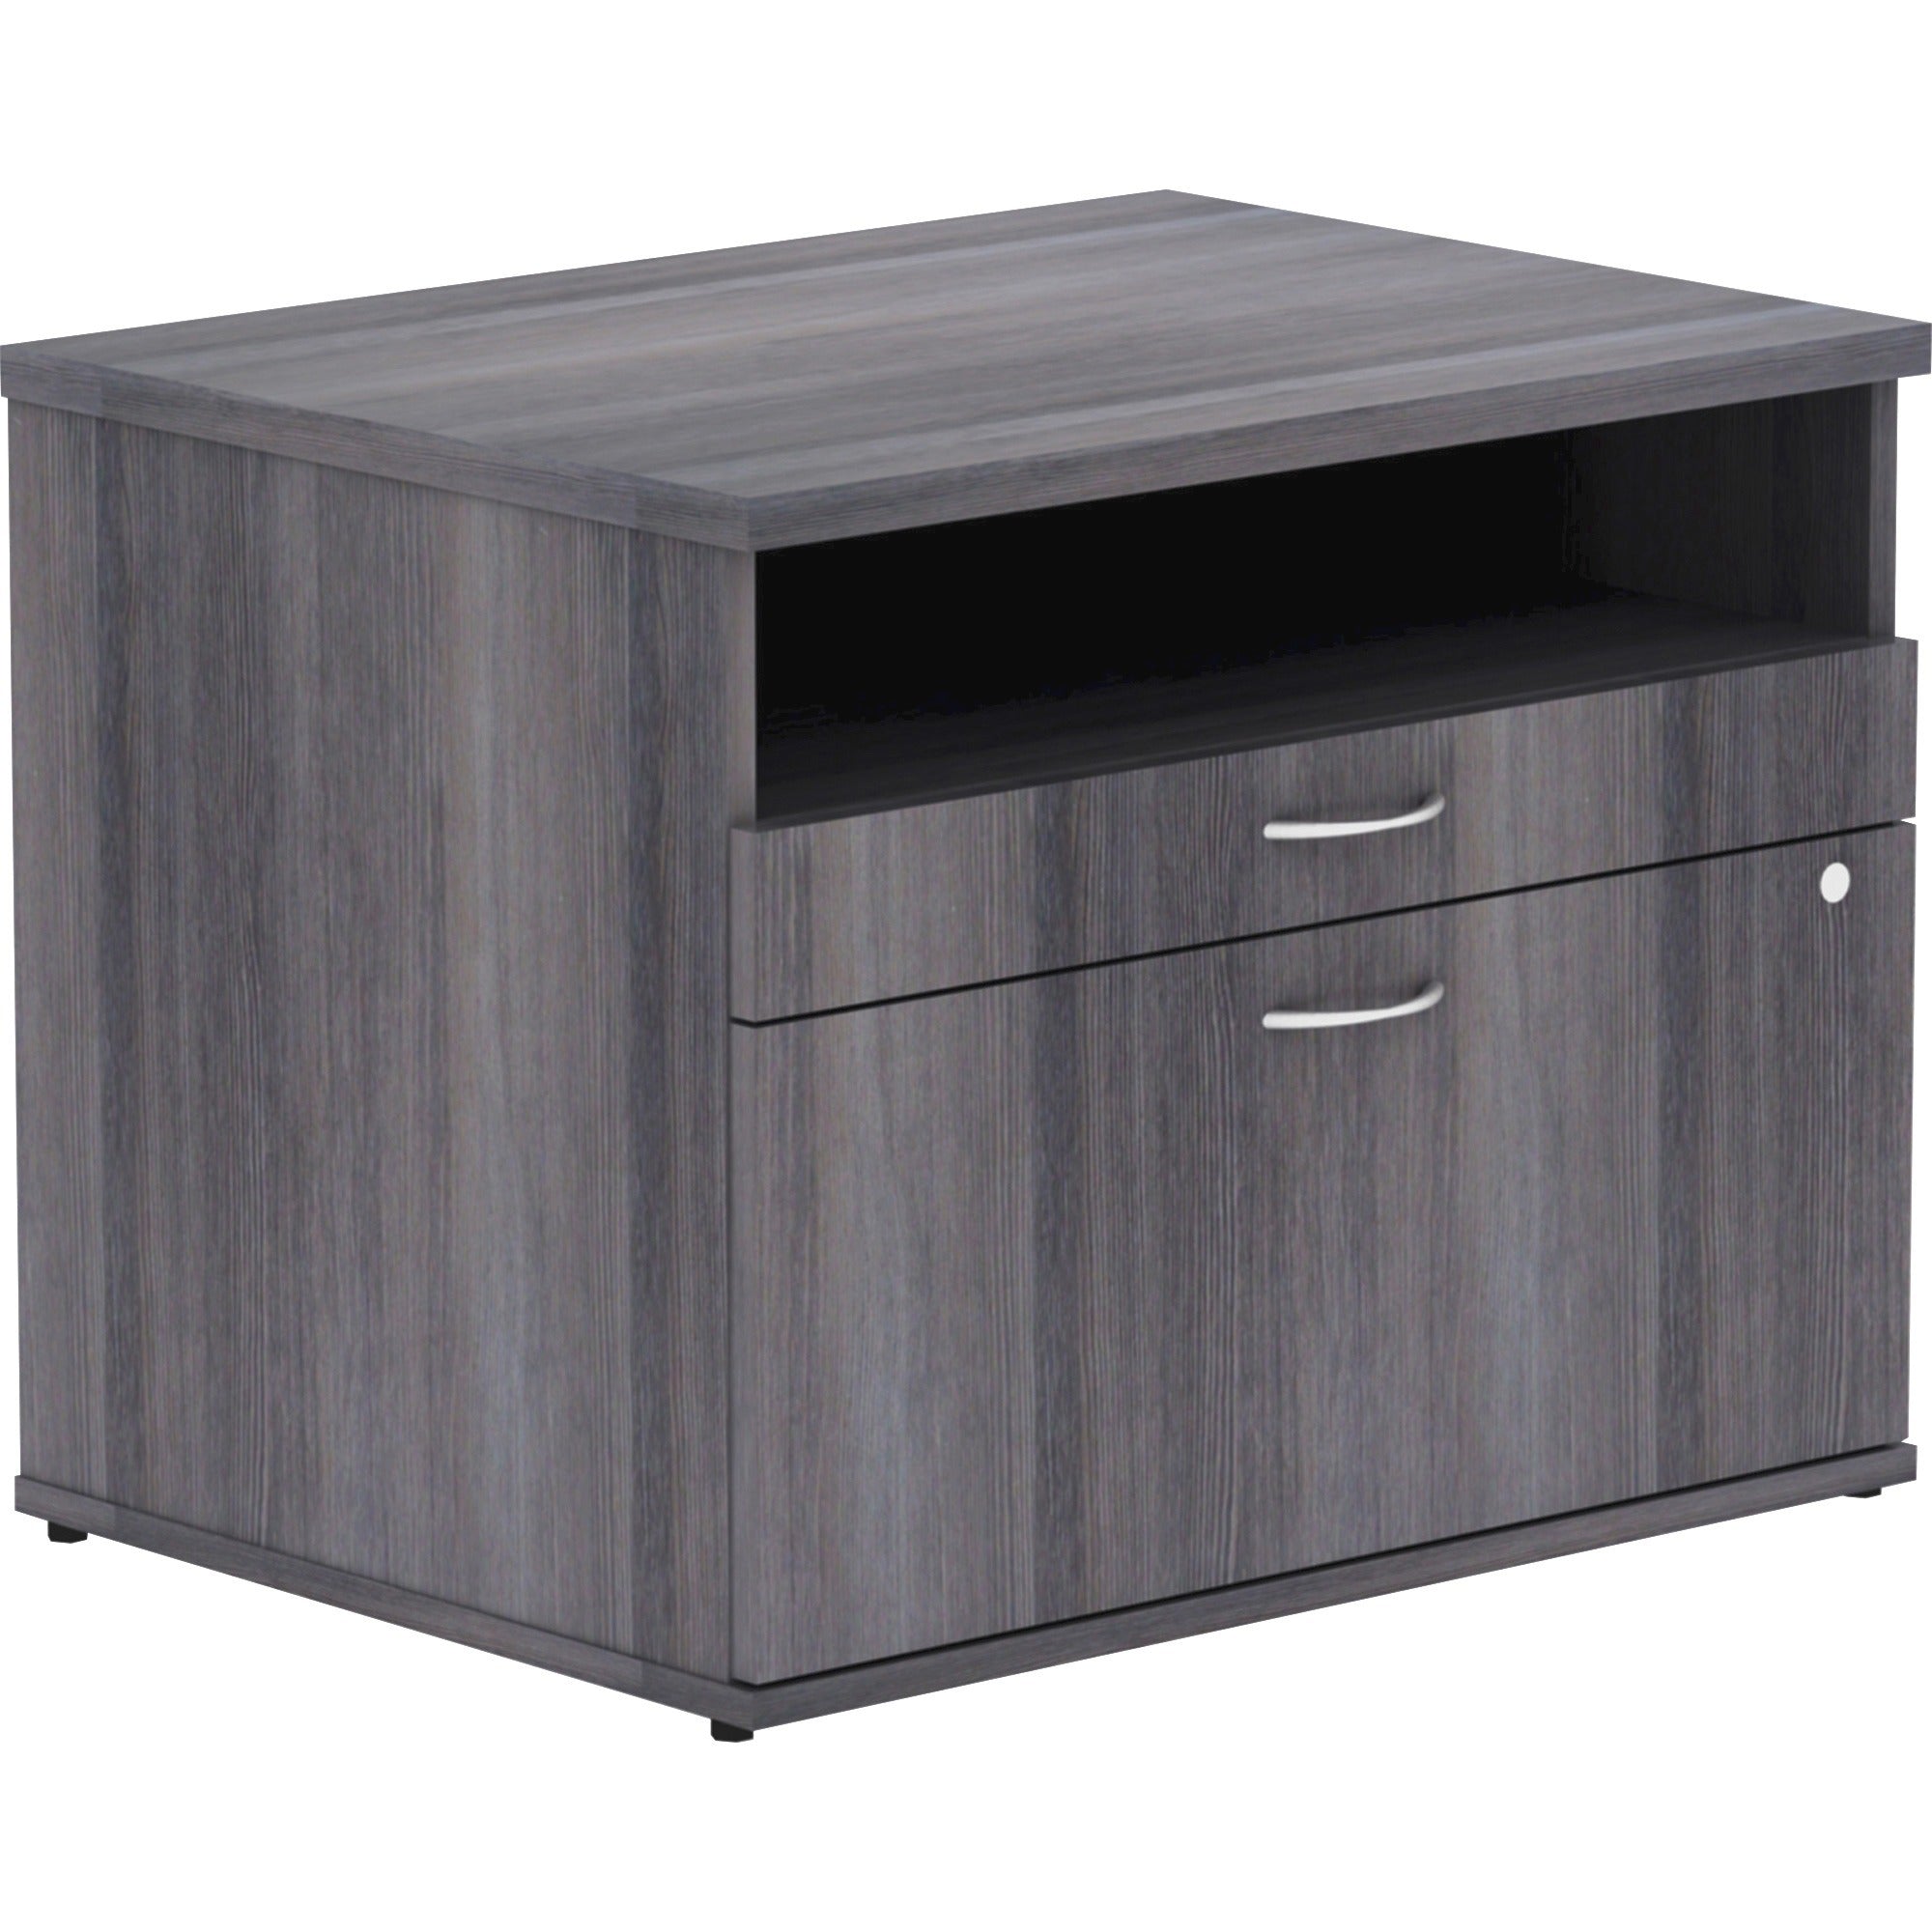 lorell-relevance-series-2-drawer-file-cabinet-credenza-w-open-shelf-295-x-22231-2-x-file-drawers-1-shelves-finish-charcoal-laminate_llr16213 - 1